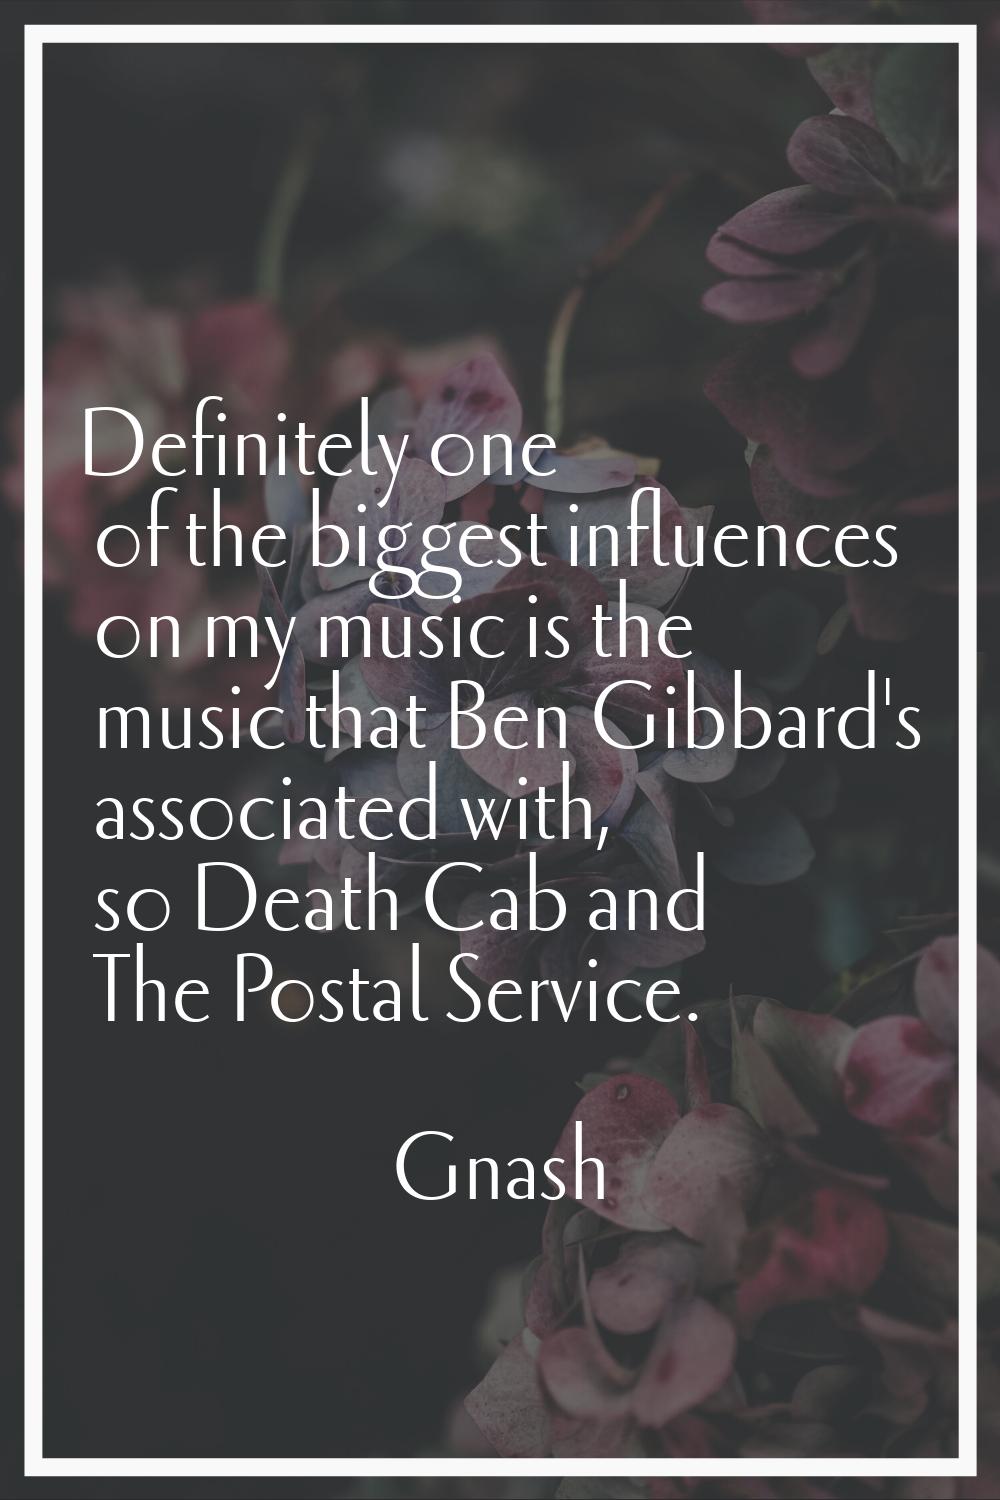 Definitely one of the biggest influences on my music is the music that Ben Gibbard's associated wit